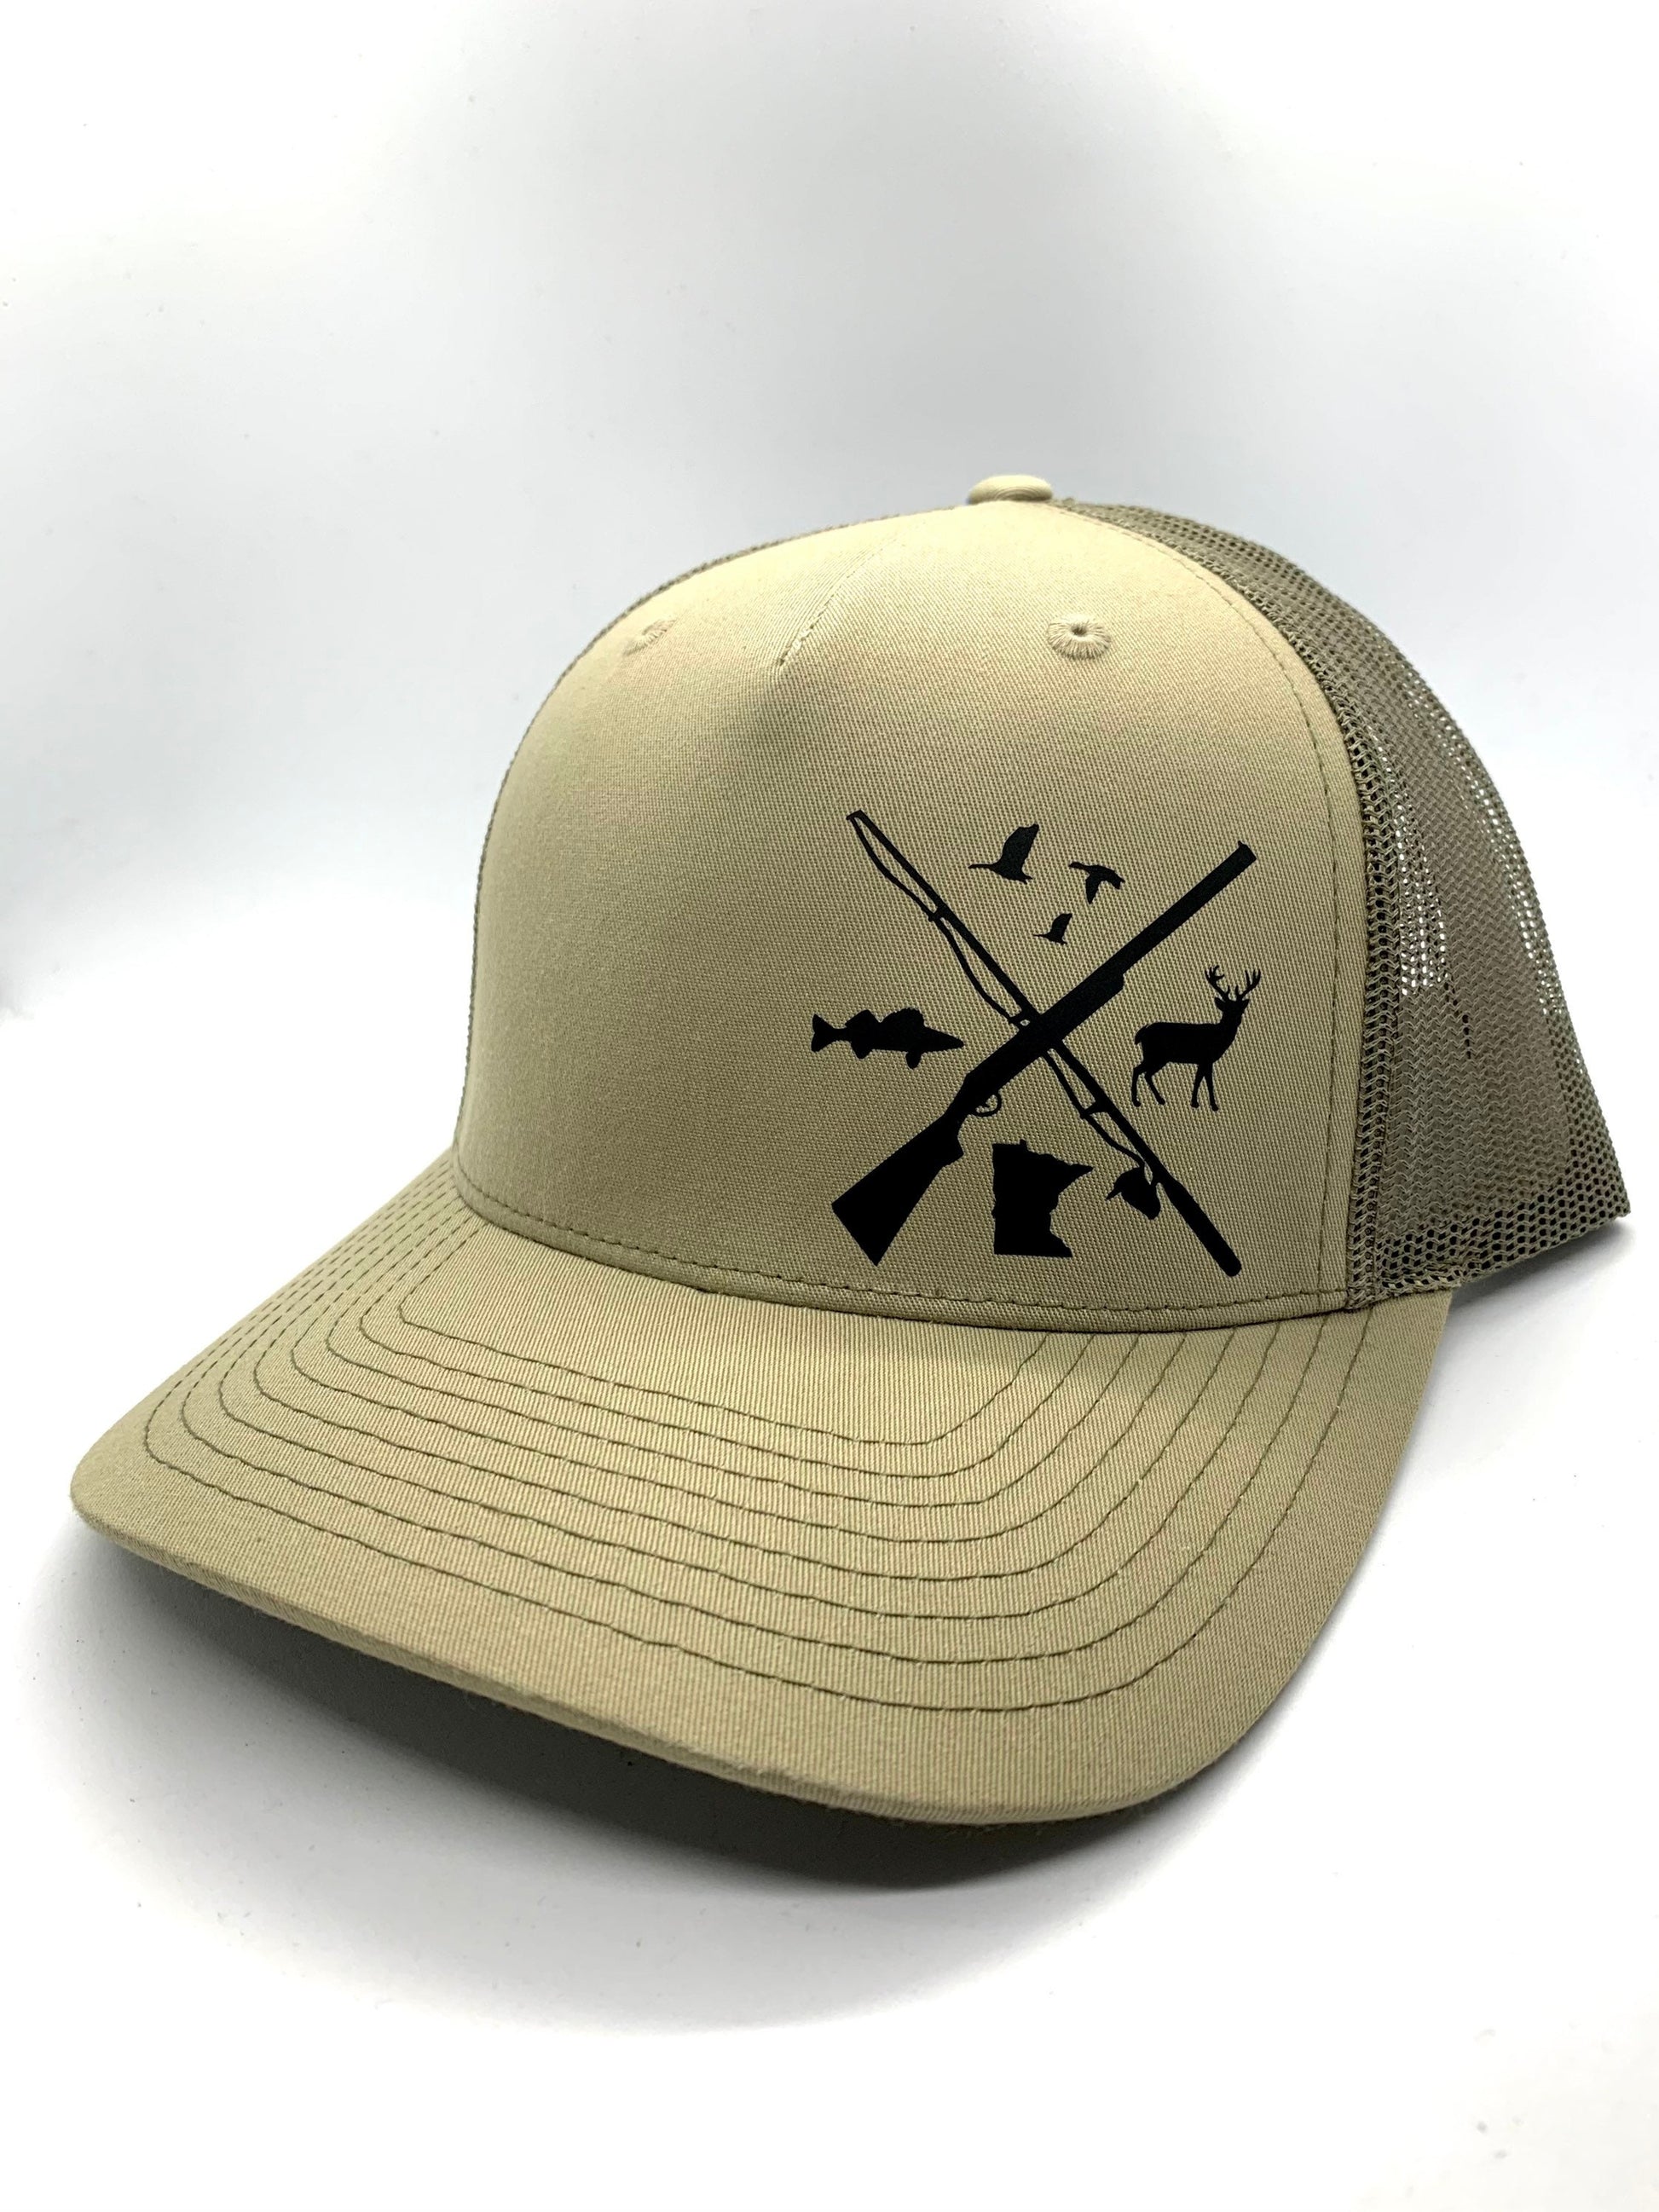 ANY STATE Waterfowl/Walleye/Buck Richardson Snapback Adjustable Hat in Pale/Khaki and Loden Mesh Color Deer-Ducks